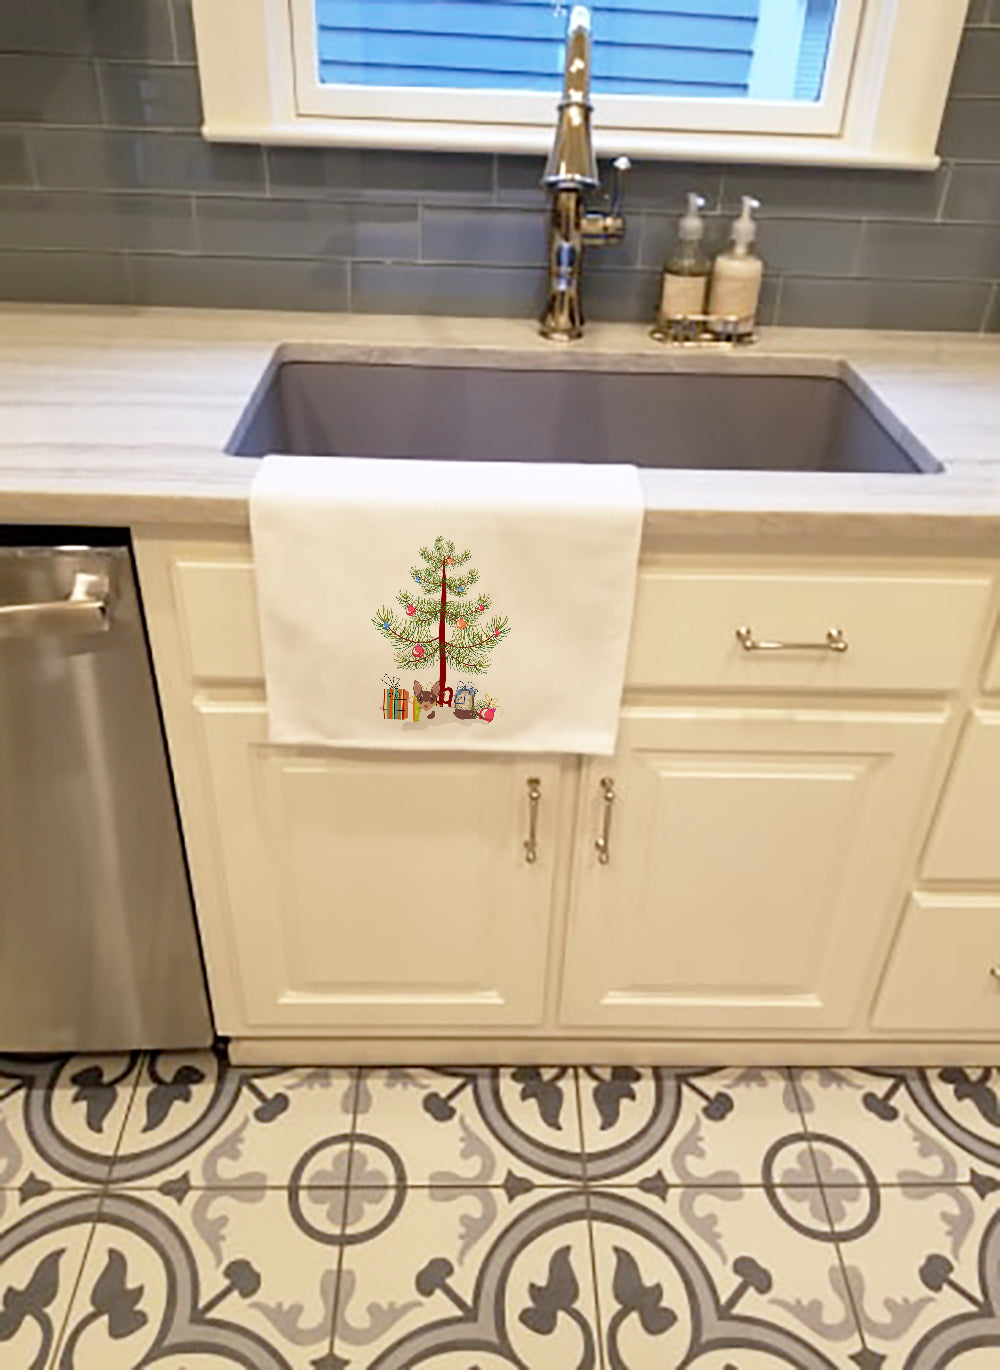 Buy this Toy Fox Terrier Christmas Tree White Kitchen Towel Set of 2